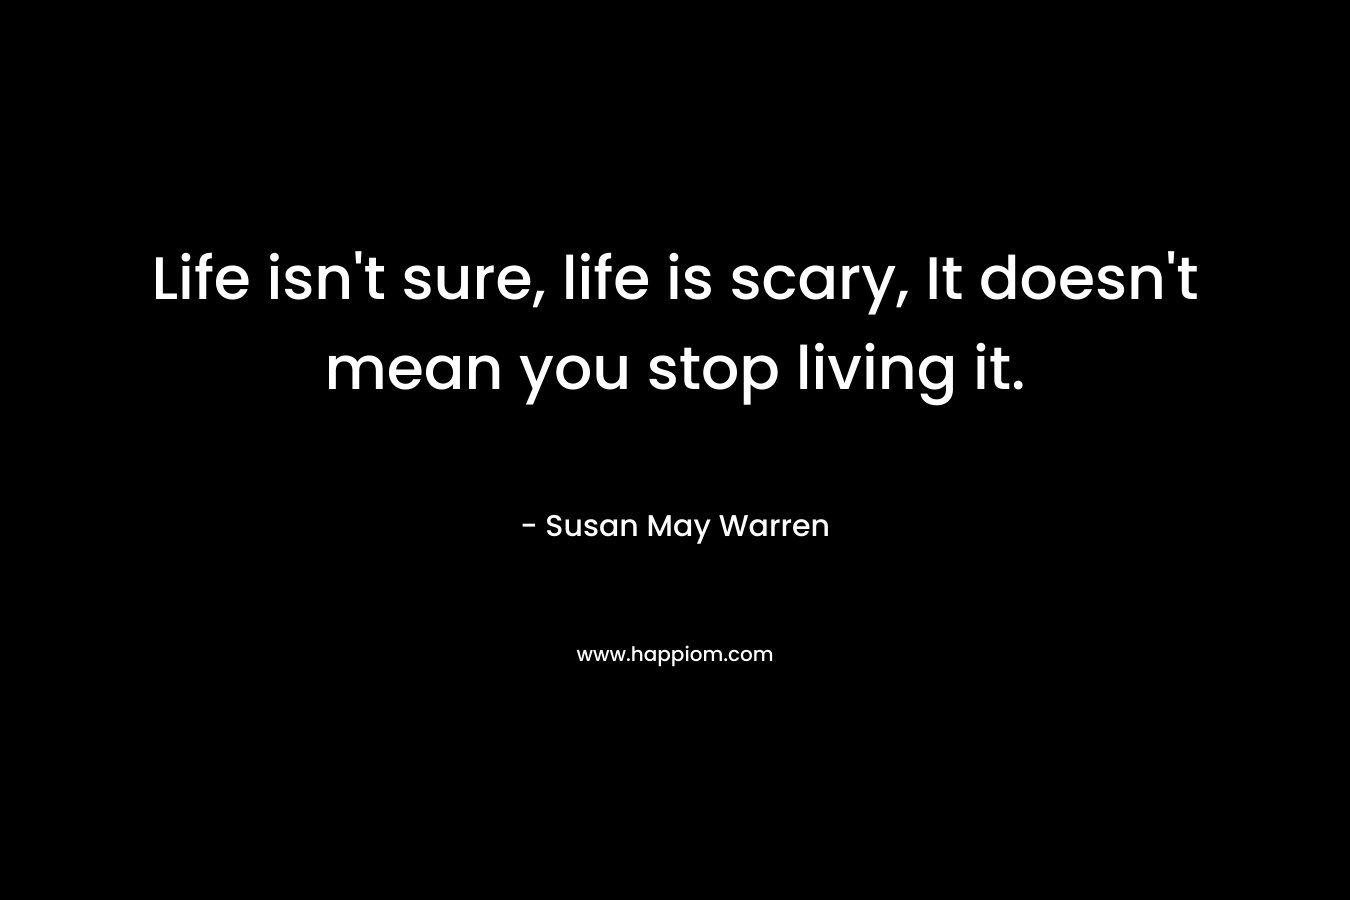 Life isn’t sure, life is scary, It doesn’t mean you stop living it. – Susan May Warren